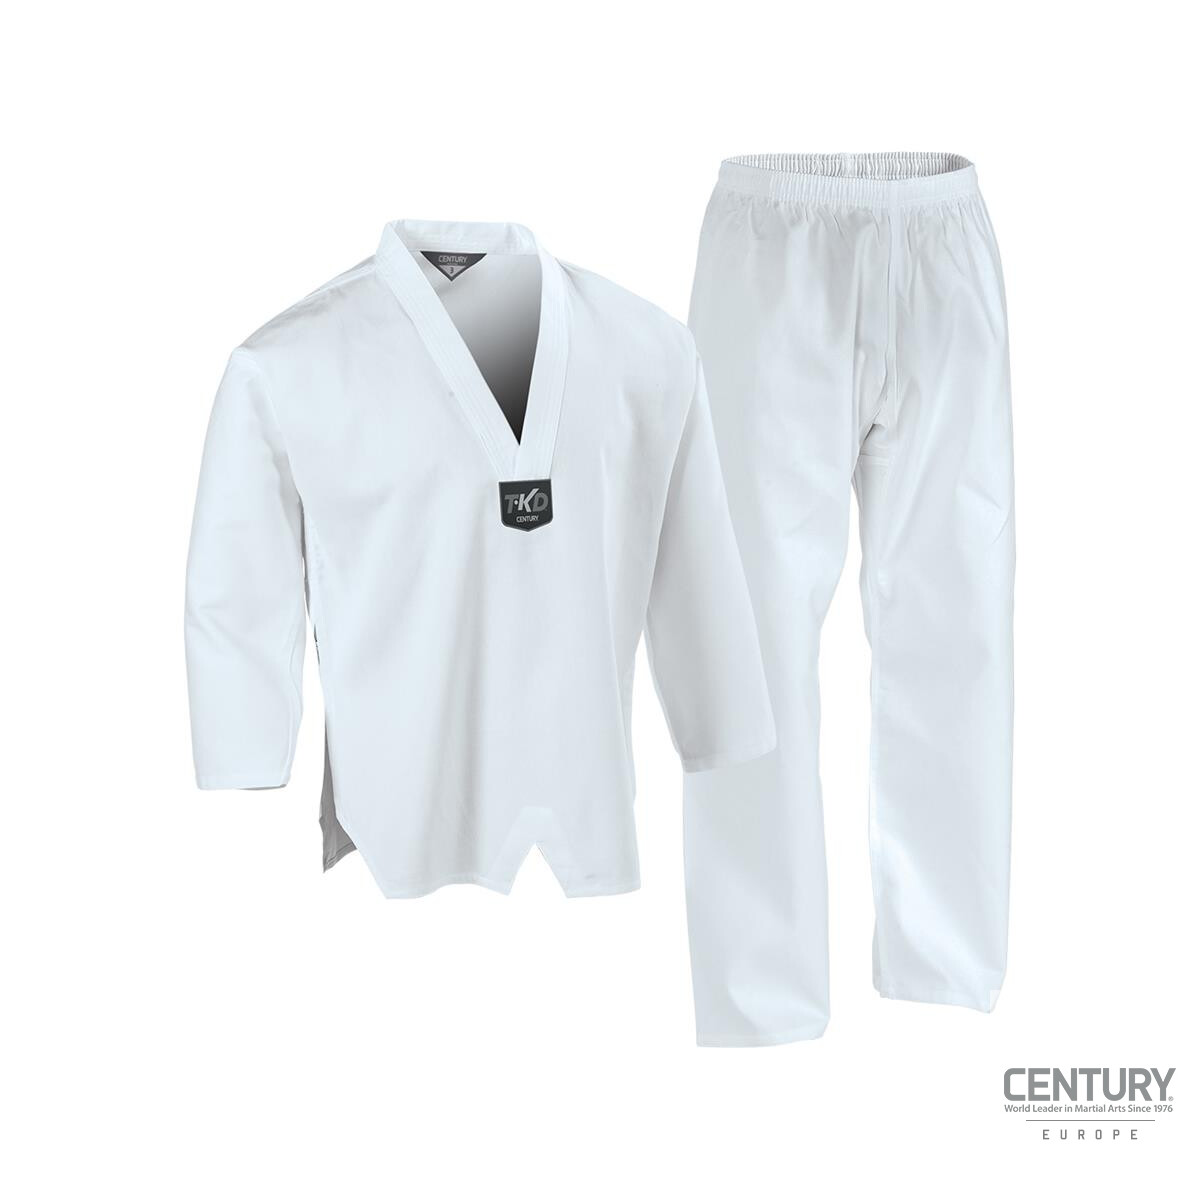 Century Kid's 7 oz White Middleweight Student Uniform with Elastic Pant 